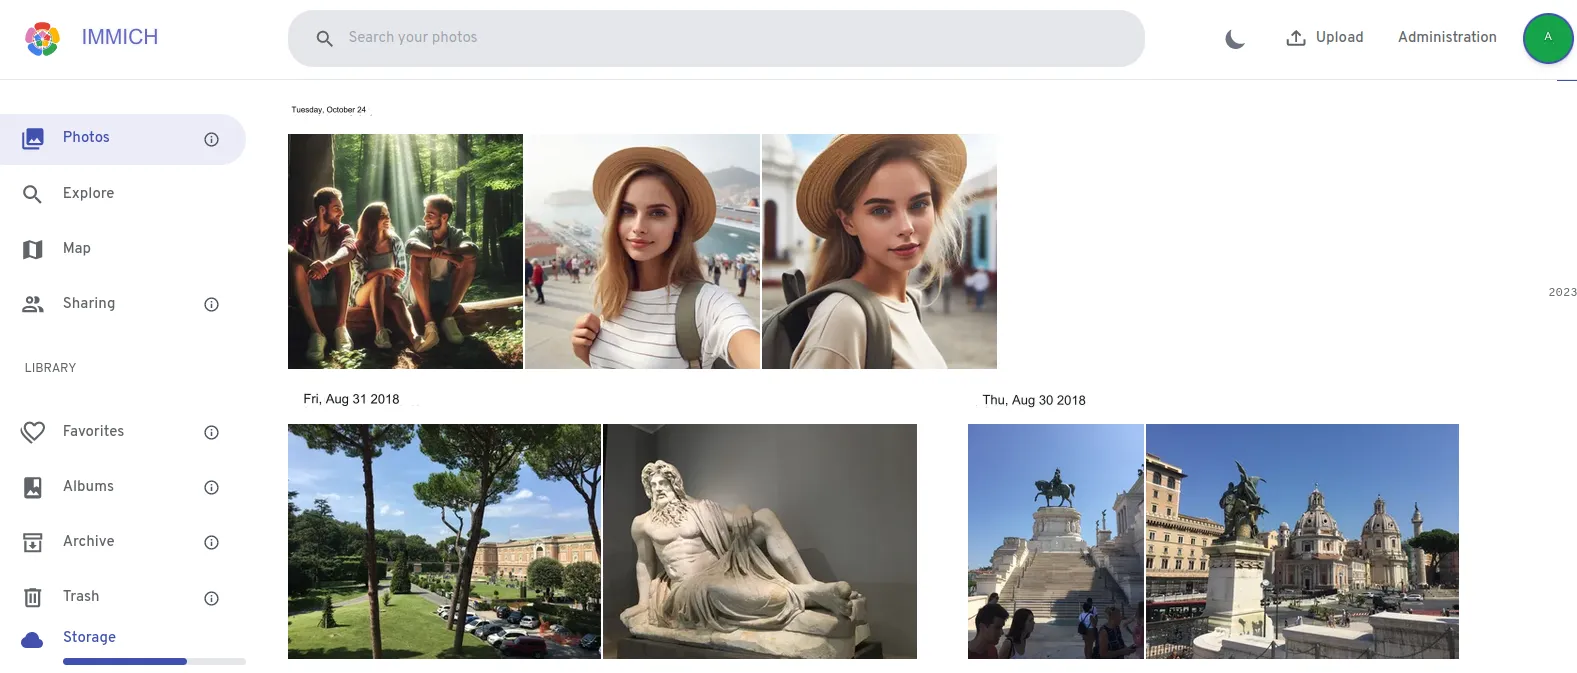 Web interface of the server program for photos IMMICH